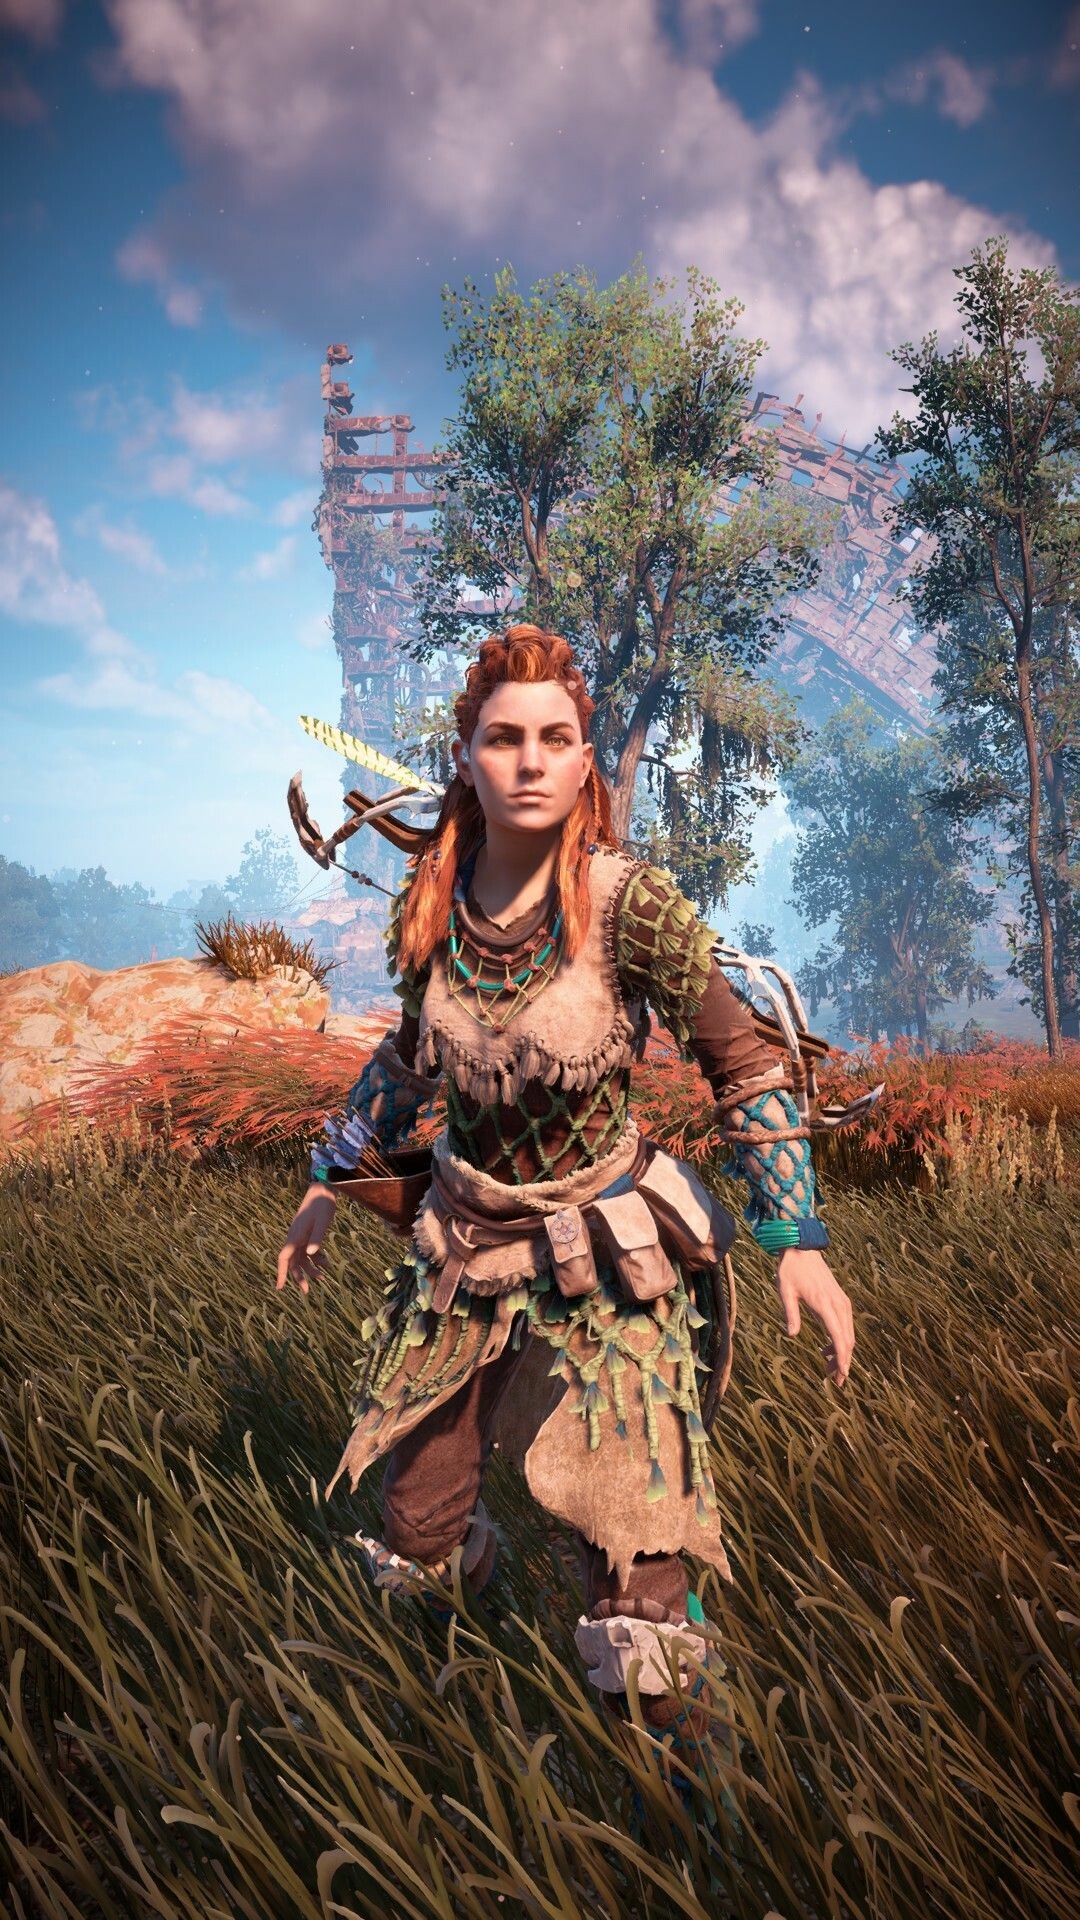 Horizon Zero Dawn: A multi-award-winning action role-playing game, Published by Sony Interactive Entertainment. 1080x1920 Full HD Wallpaper.